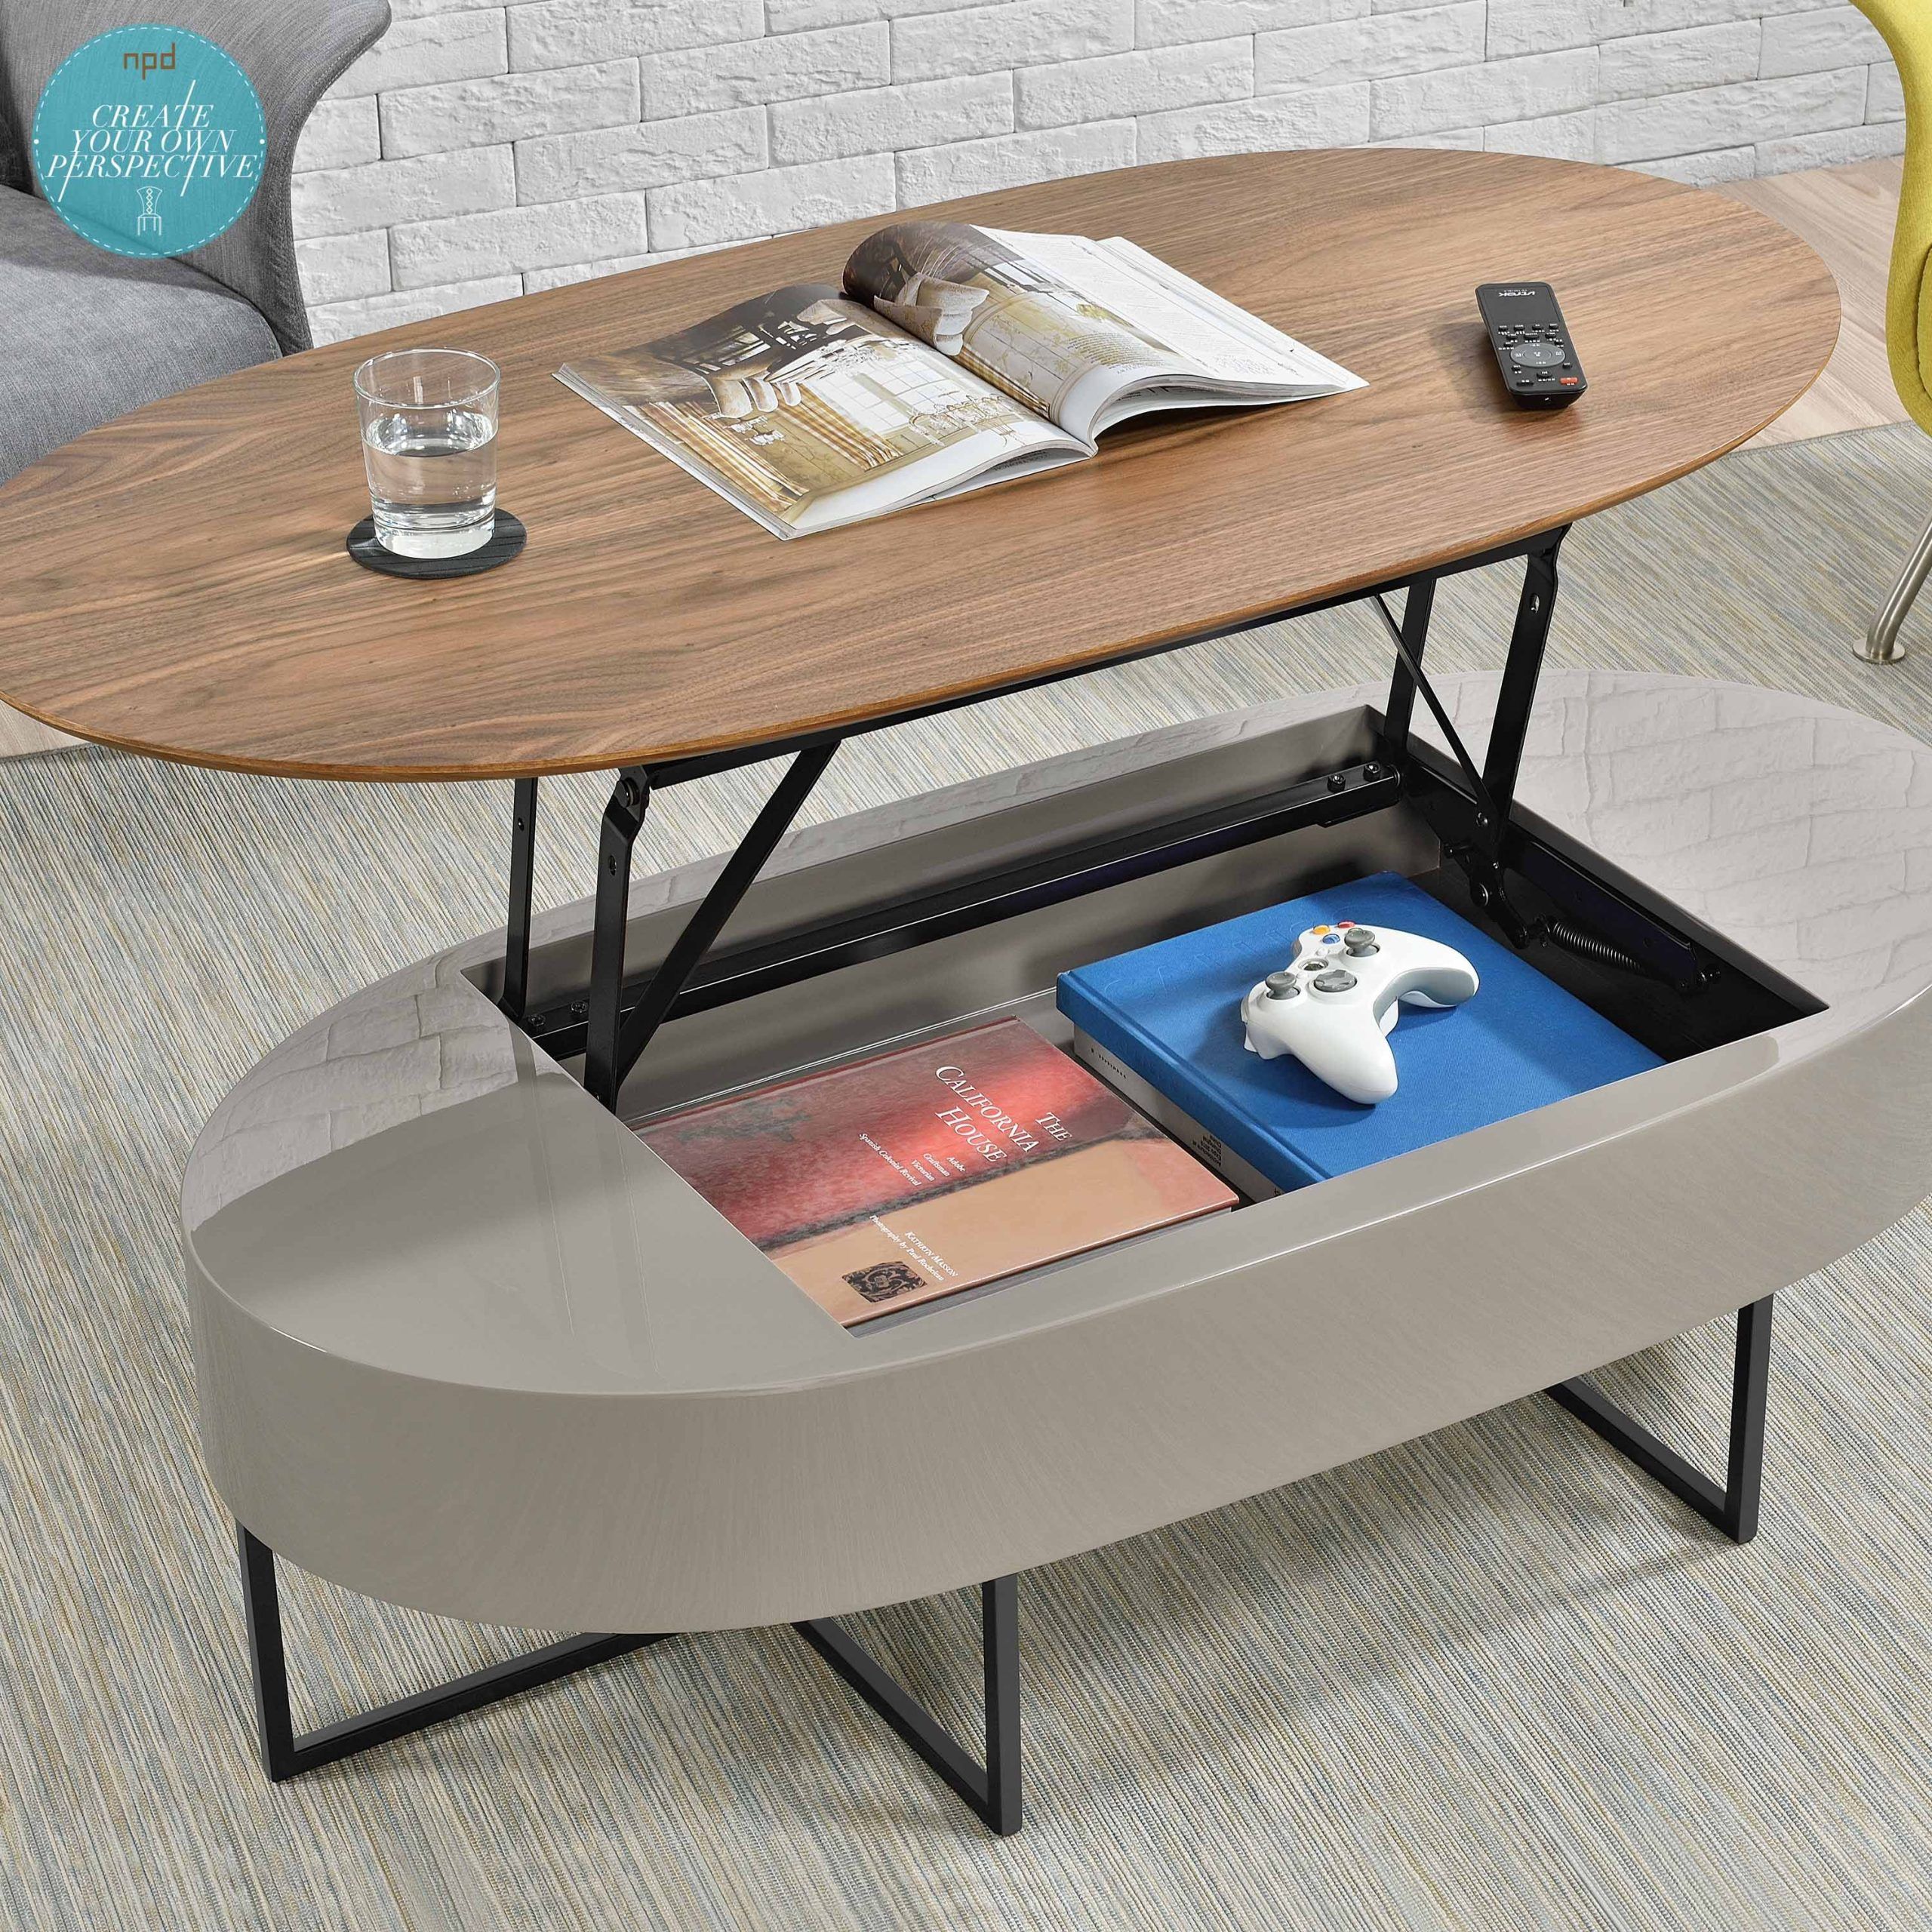 Consider This Multi Functional Oval Lift Top Table If You're Moving To With Regard To Modern Wooden Lift Top Tables (View 5 of 20)